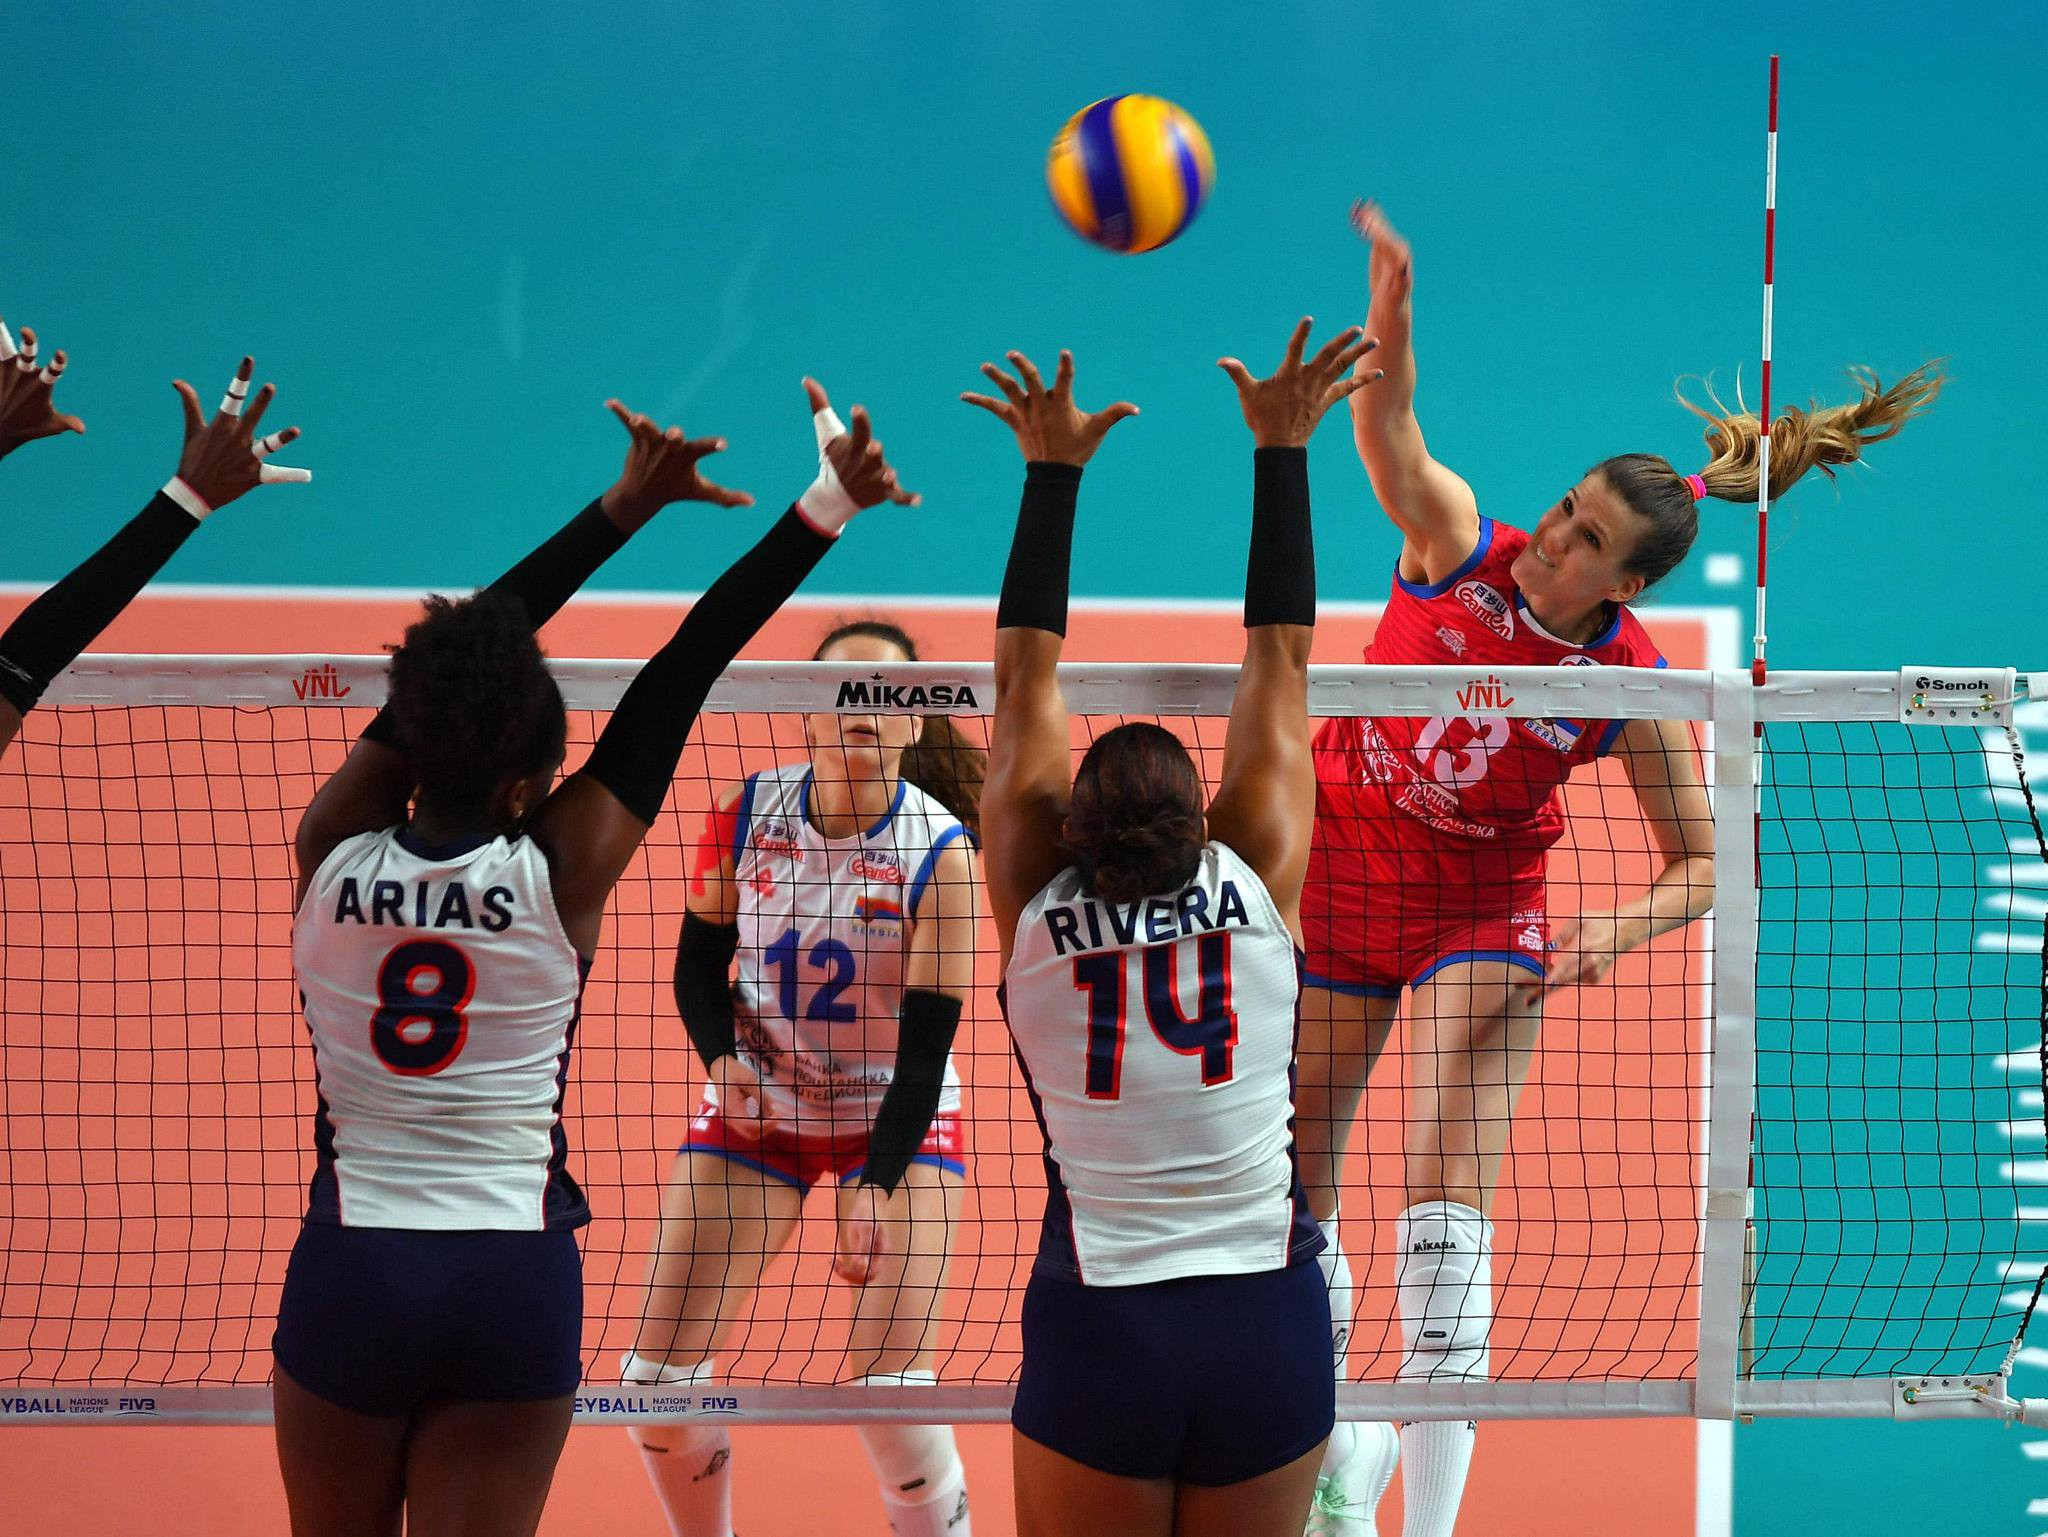 World champions Serbia get back to winning ways in FIVB Women's Nations League